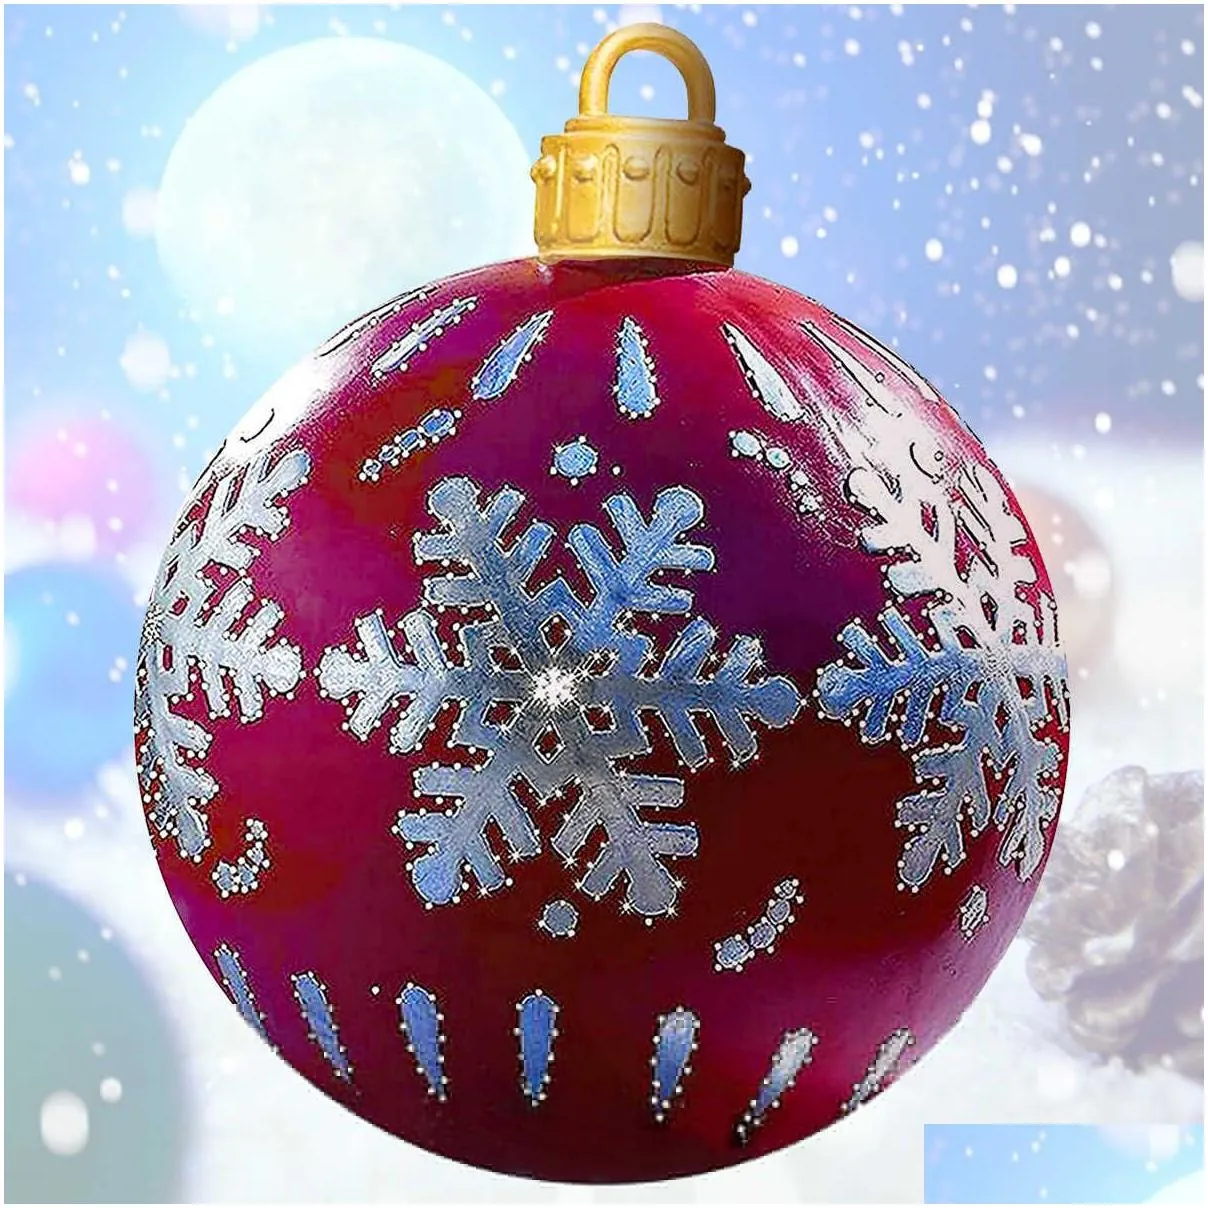 Christmas Decorations Balls Big Inflatable Xmas Tree Ornament Nt Spheres Home Decoration Toy For Year House Yard Garden Outdoor Part Dhzpc